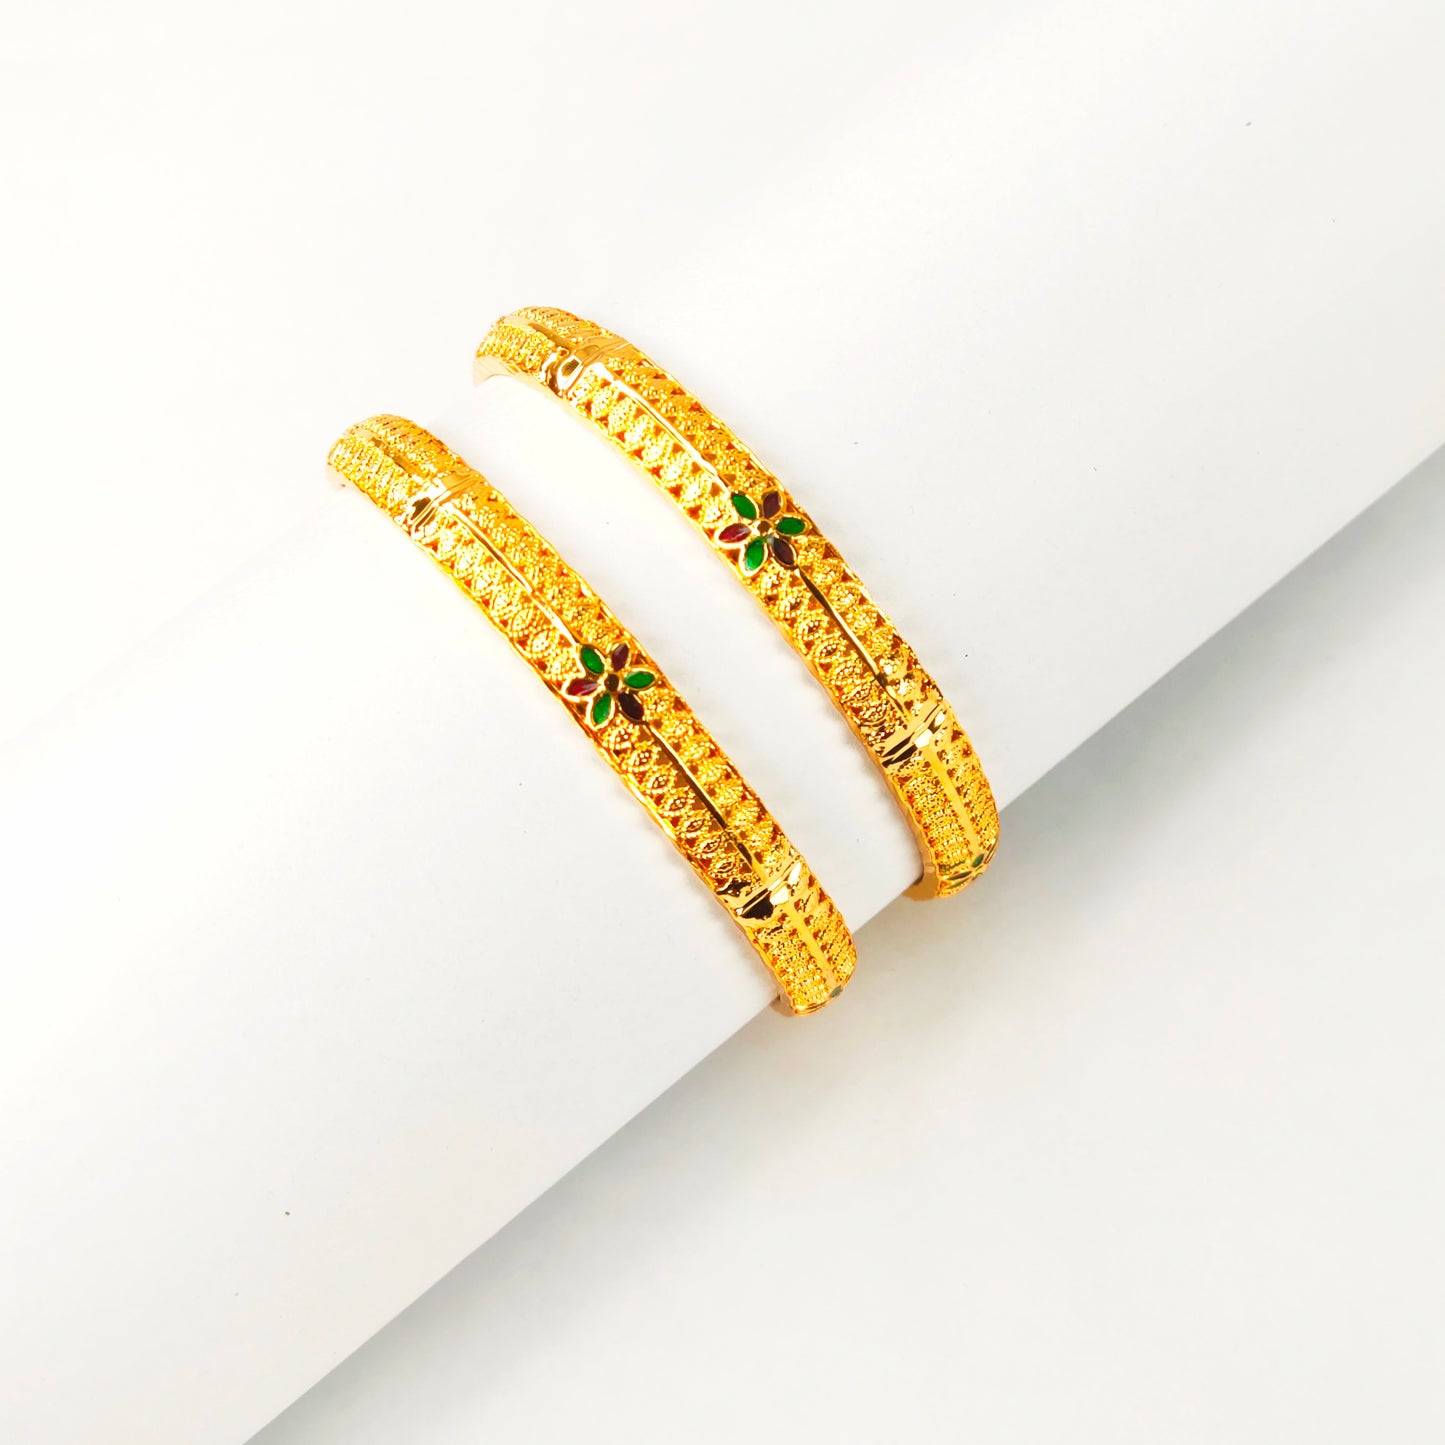  One Gram Gold Plated Bangles For Daily Use By Asp Fashion Jewellery